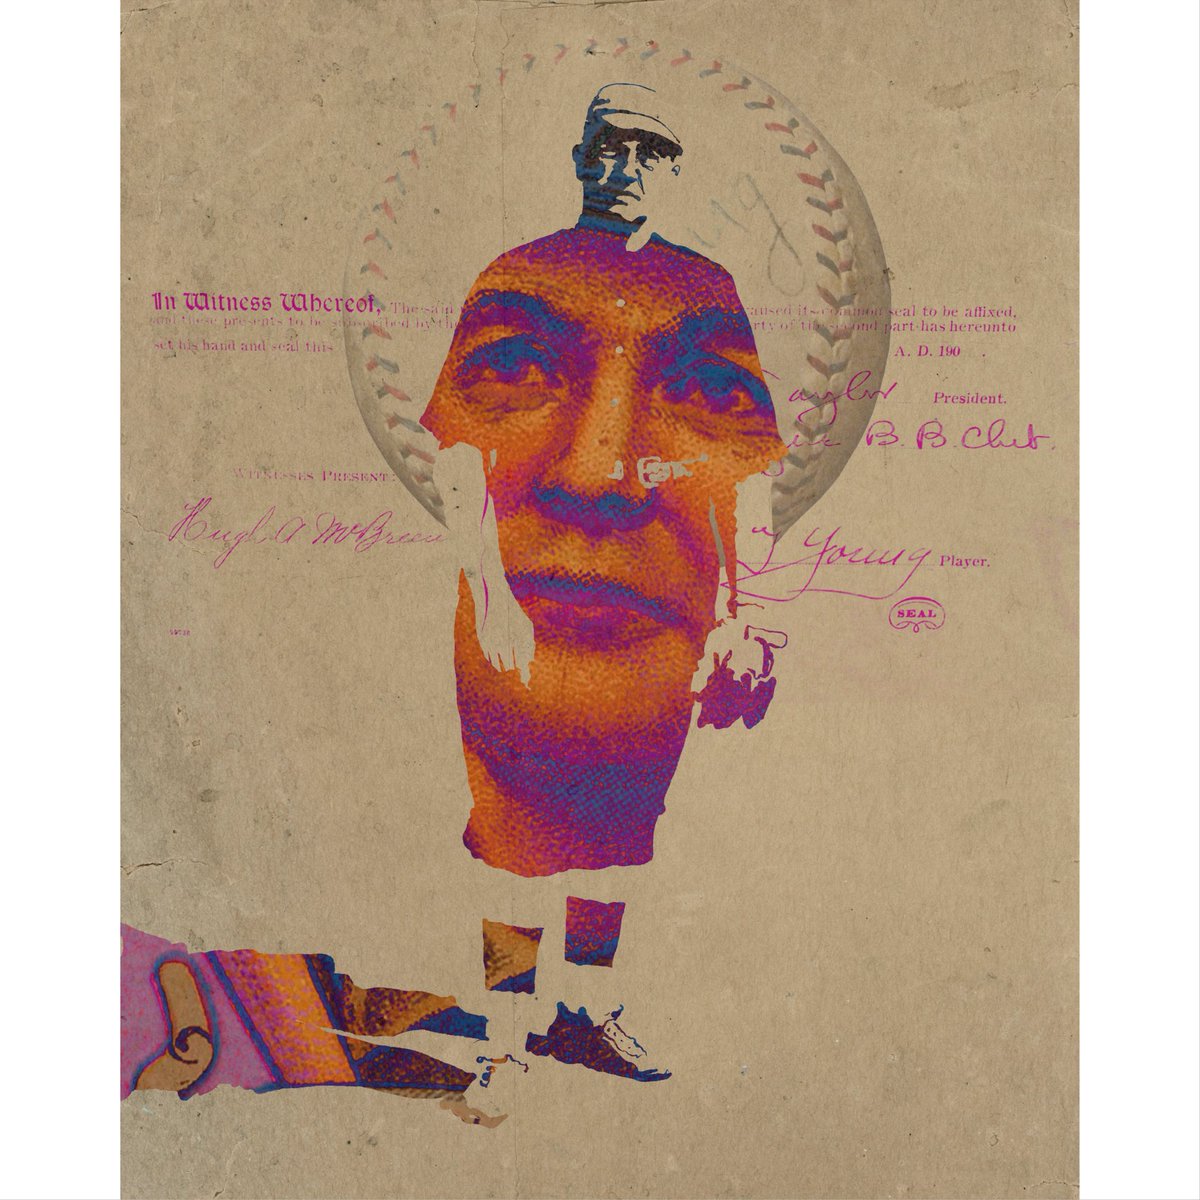 This Day in Baseball History: May 19, 1910 - Cy Young wins the 500th game of his career as the Cleveland Naps beat the Washington Senators, 5 - 4, in 11 innings. He is the only pitcher in major league history to ever reach this milestone. . . . #tripleplaydesign #cyyoung